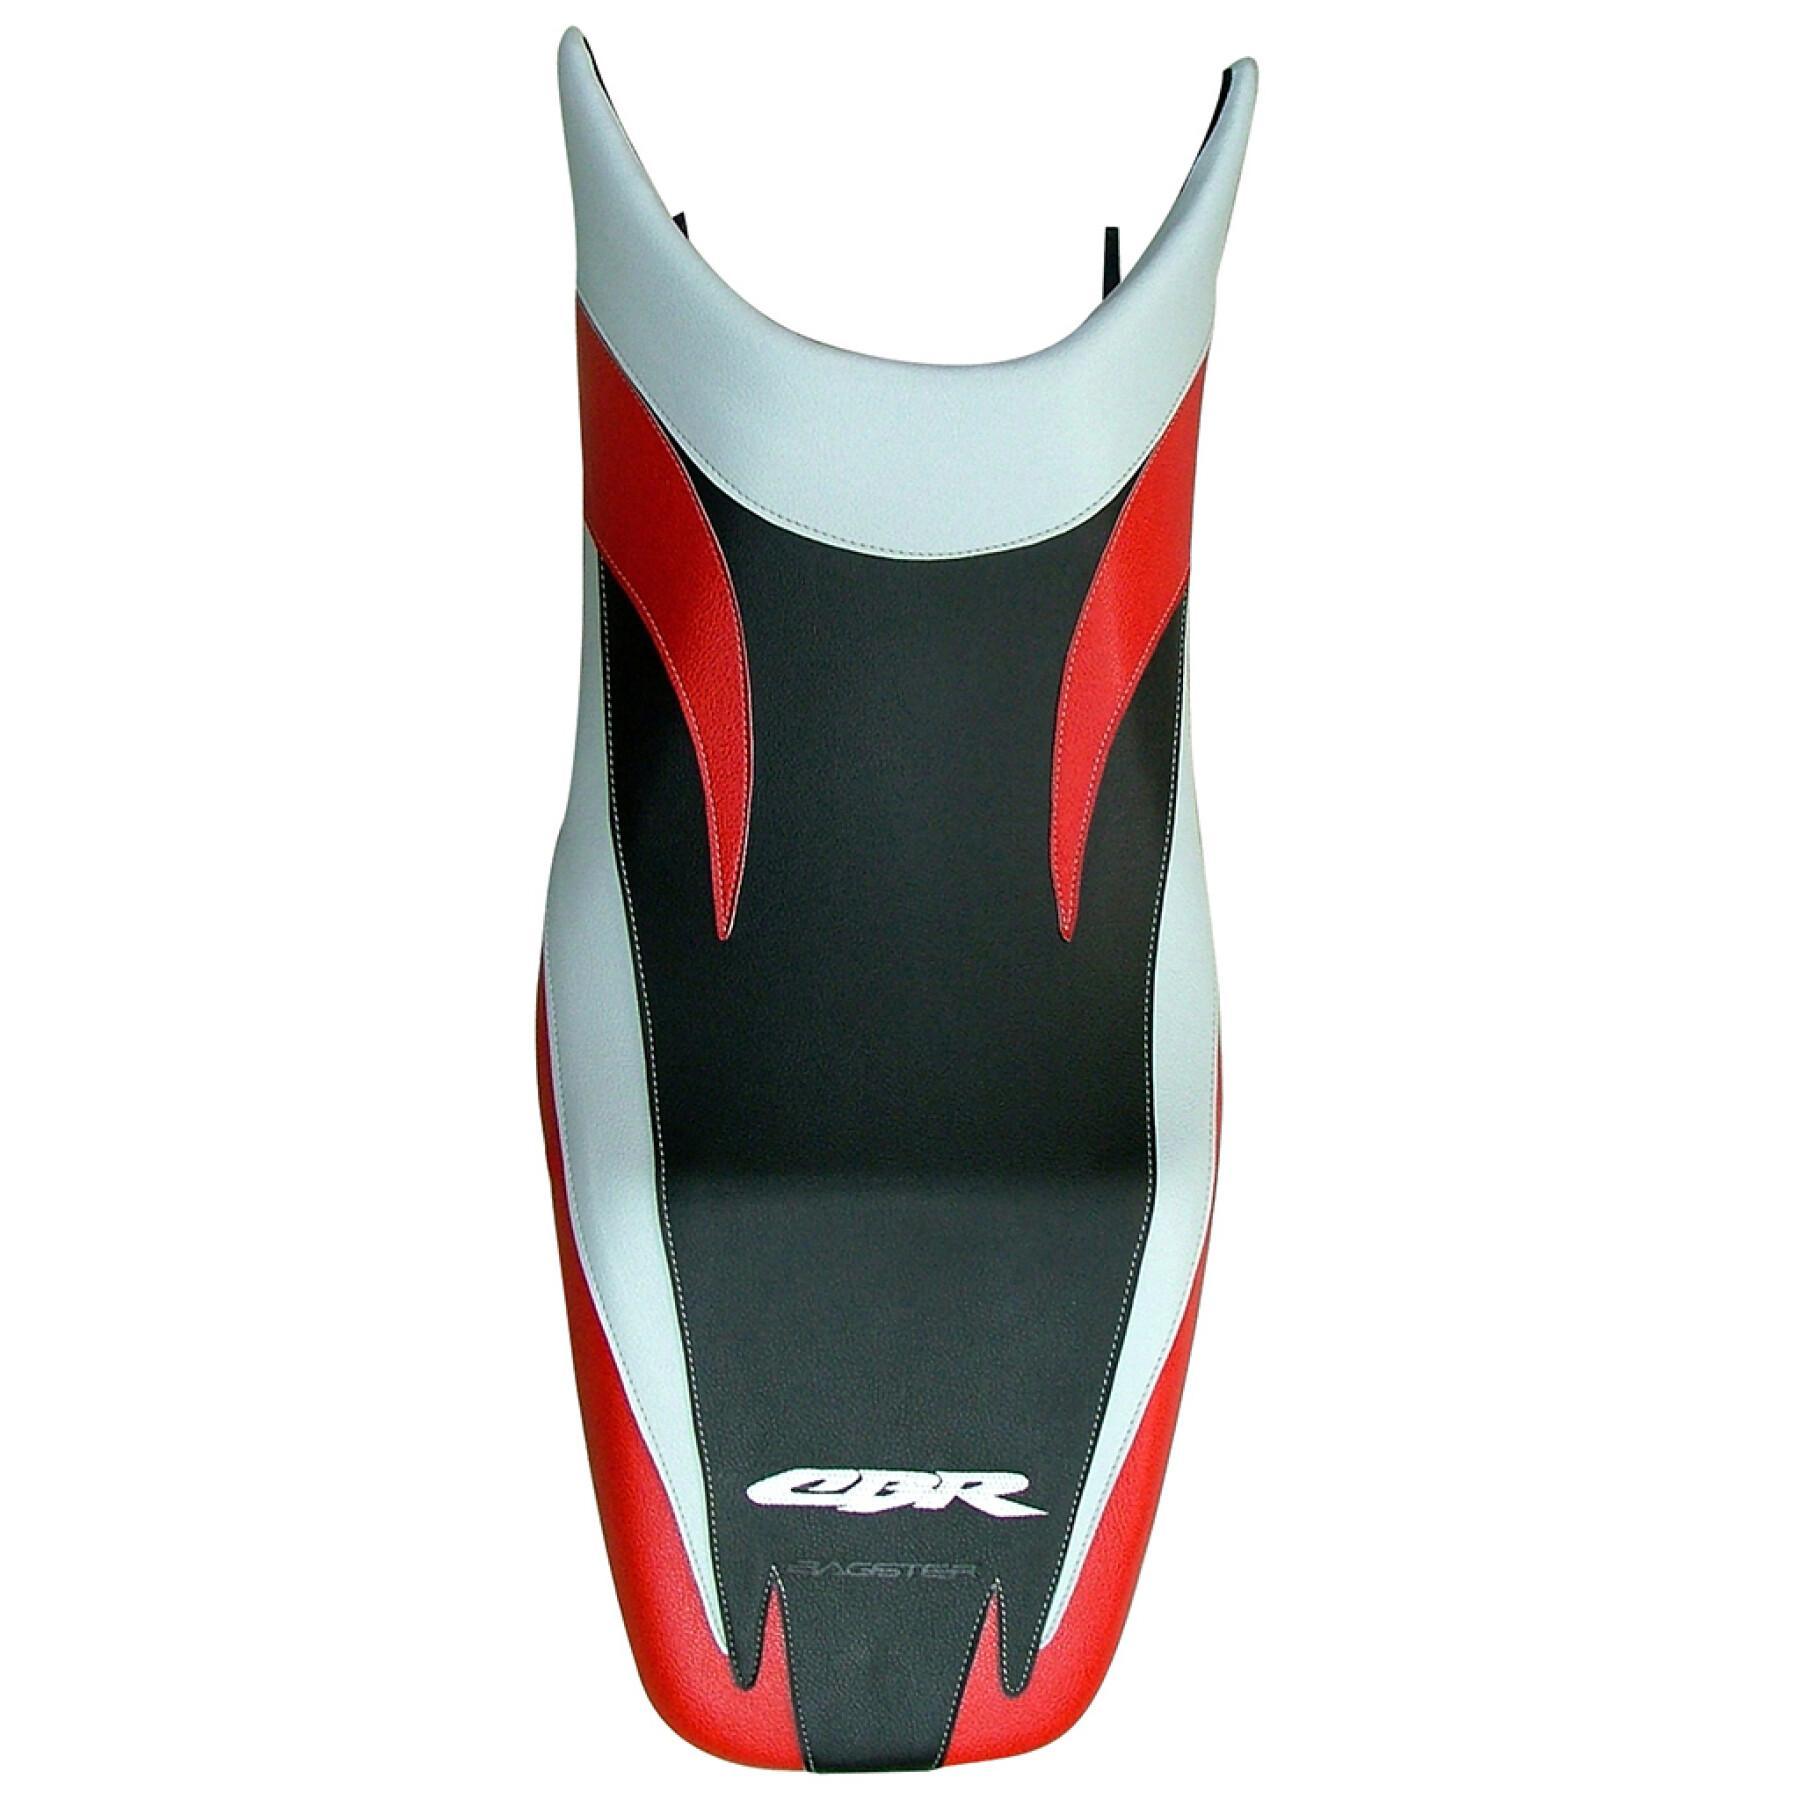 Scooter seat cover Bagster cbr 600 f